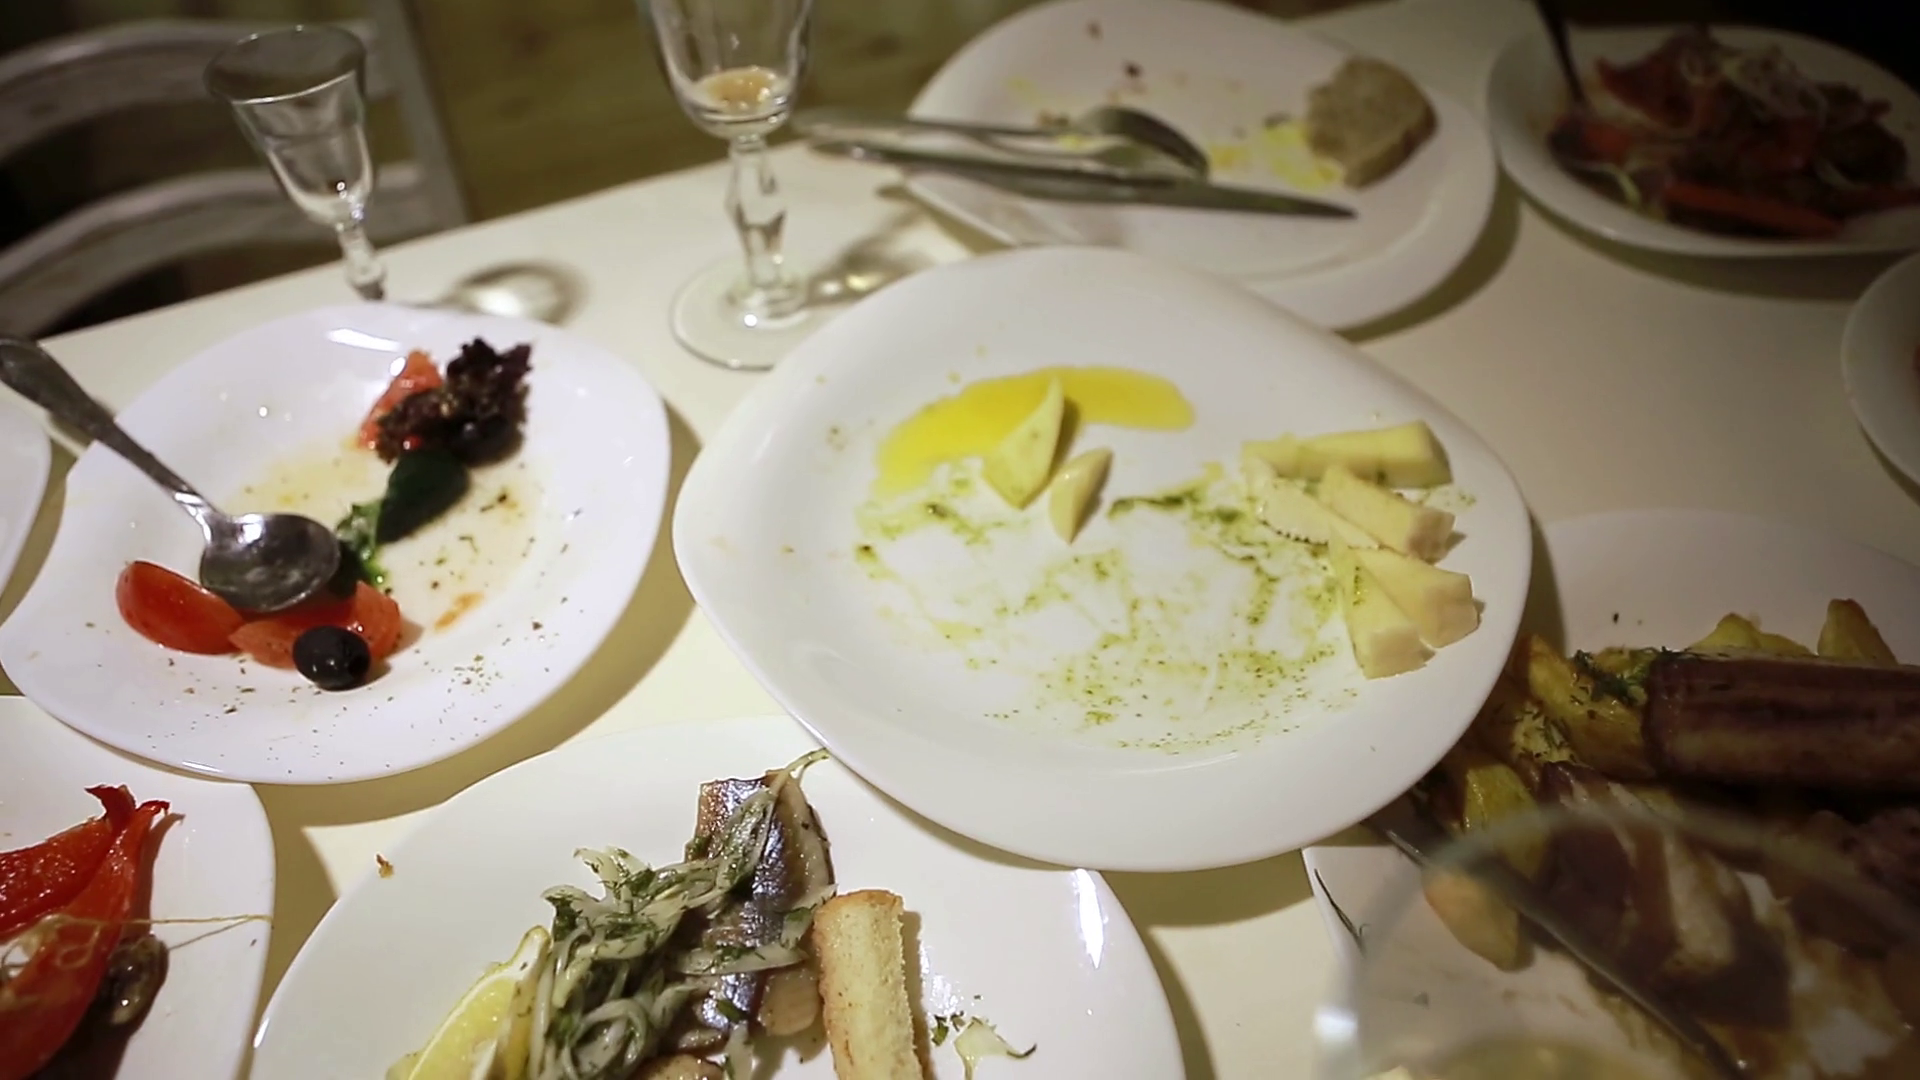 Wasted food on served festive table after dinner party Stock Video Footage  - Storyblocks Video